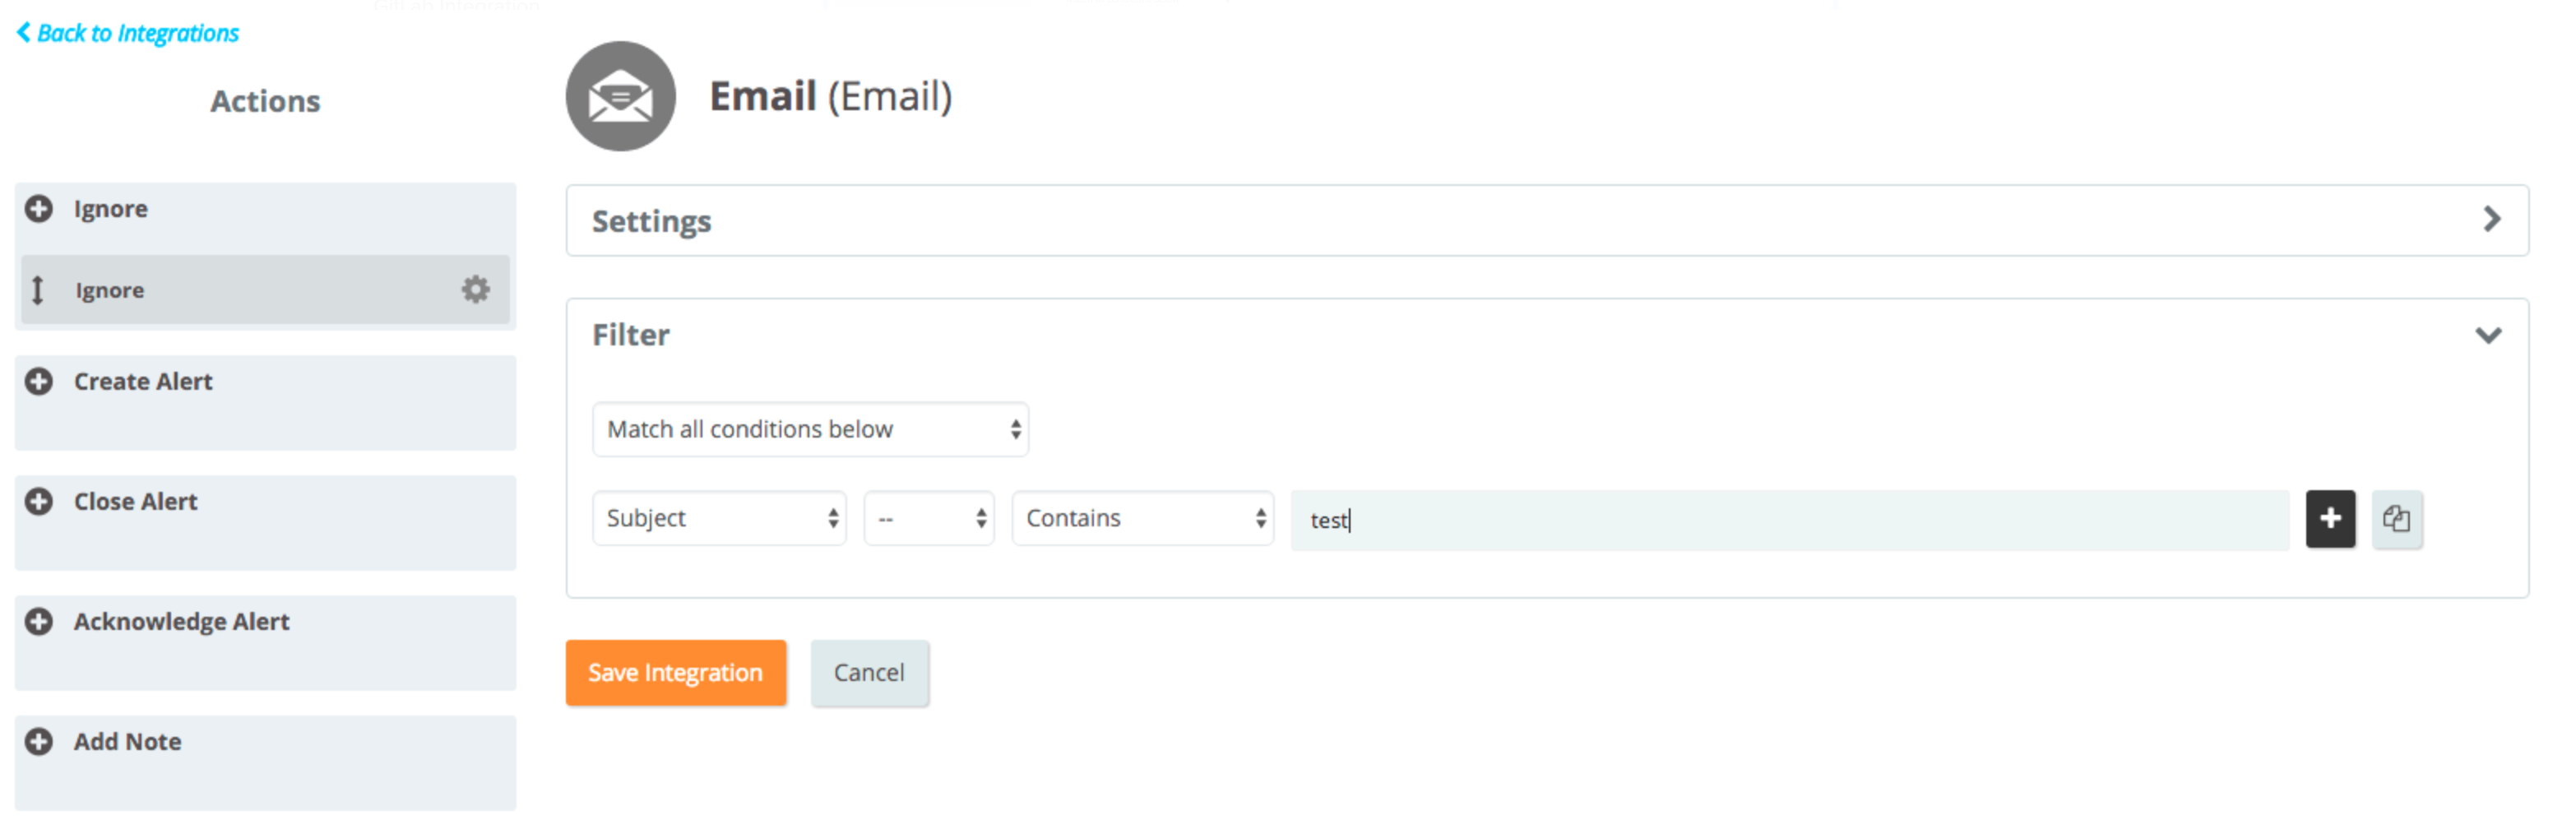 An image that shows how to create an ignore action for email integrations.